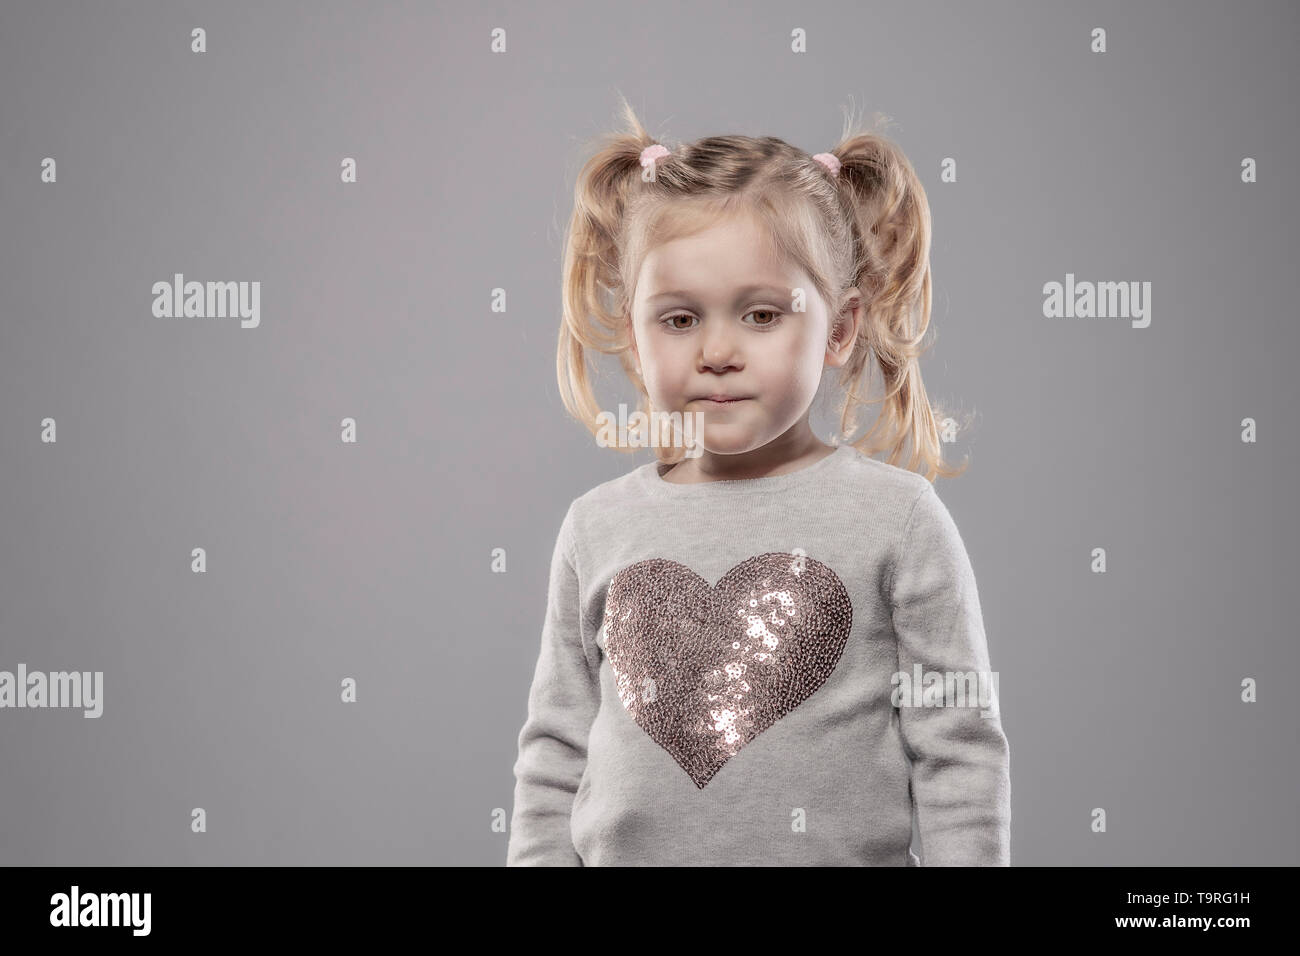 portrait of a pensive little girl of 3 years, blond hair with pigtails. Stock Photo